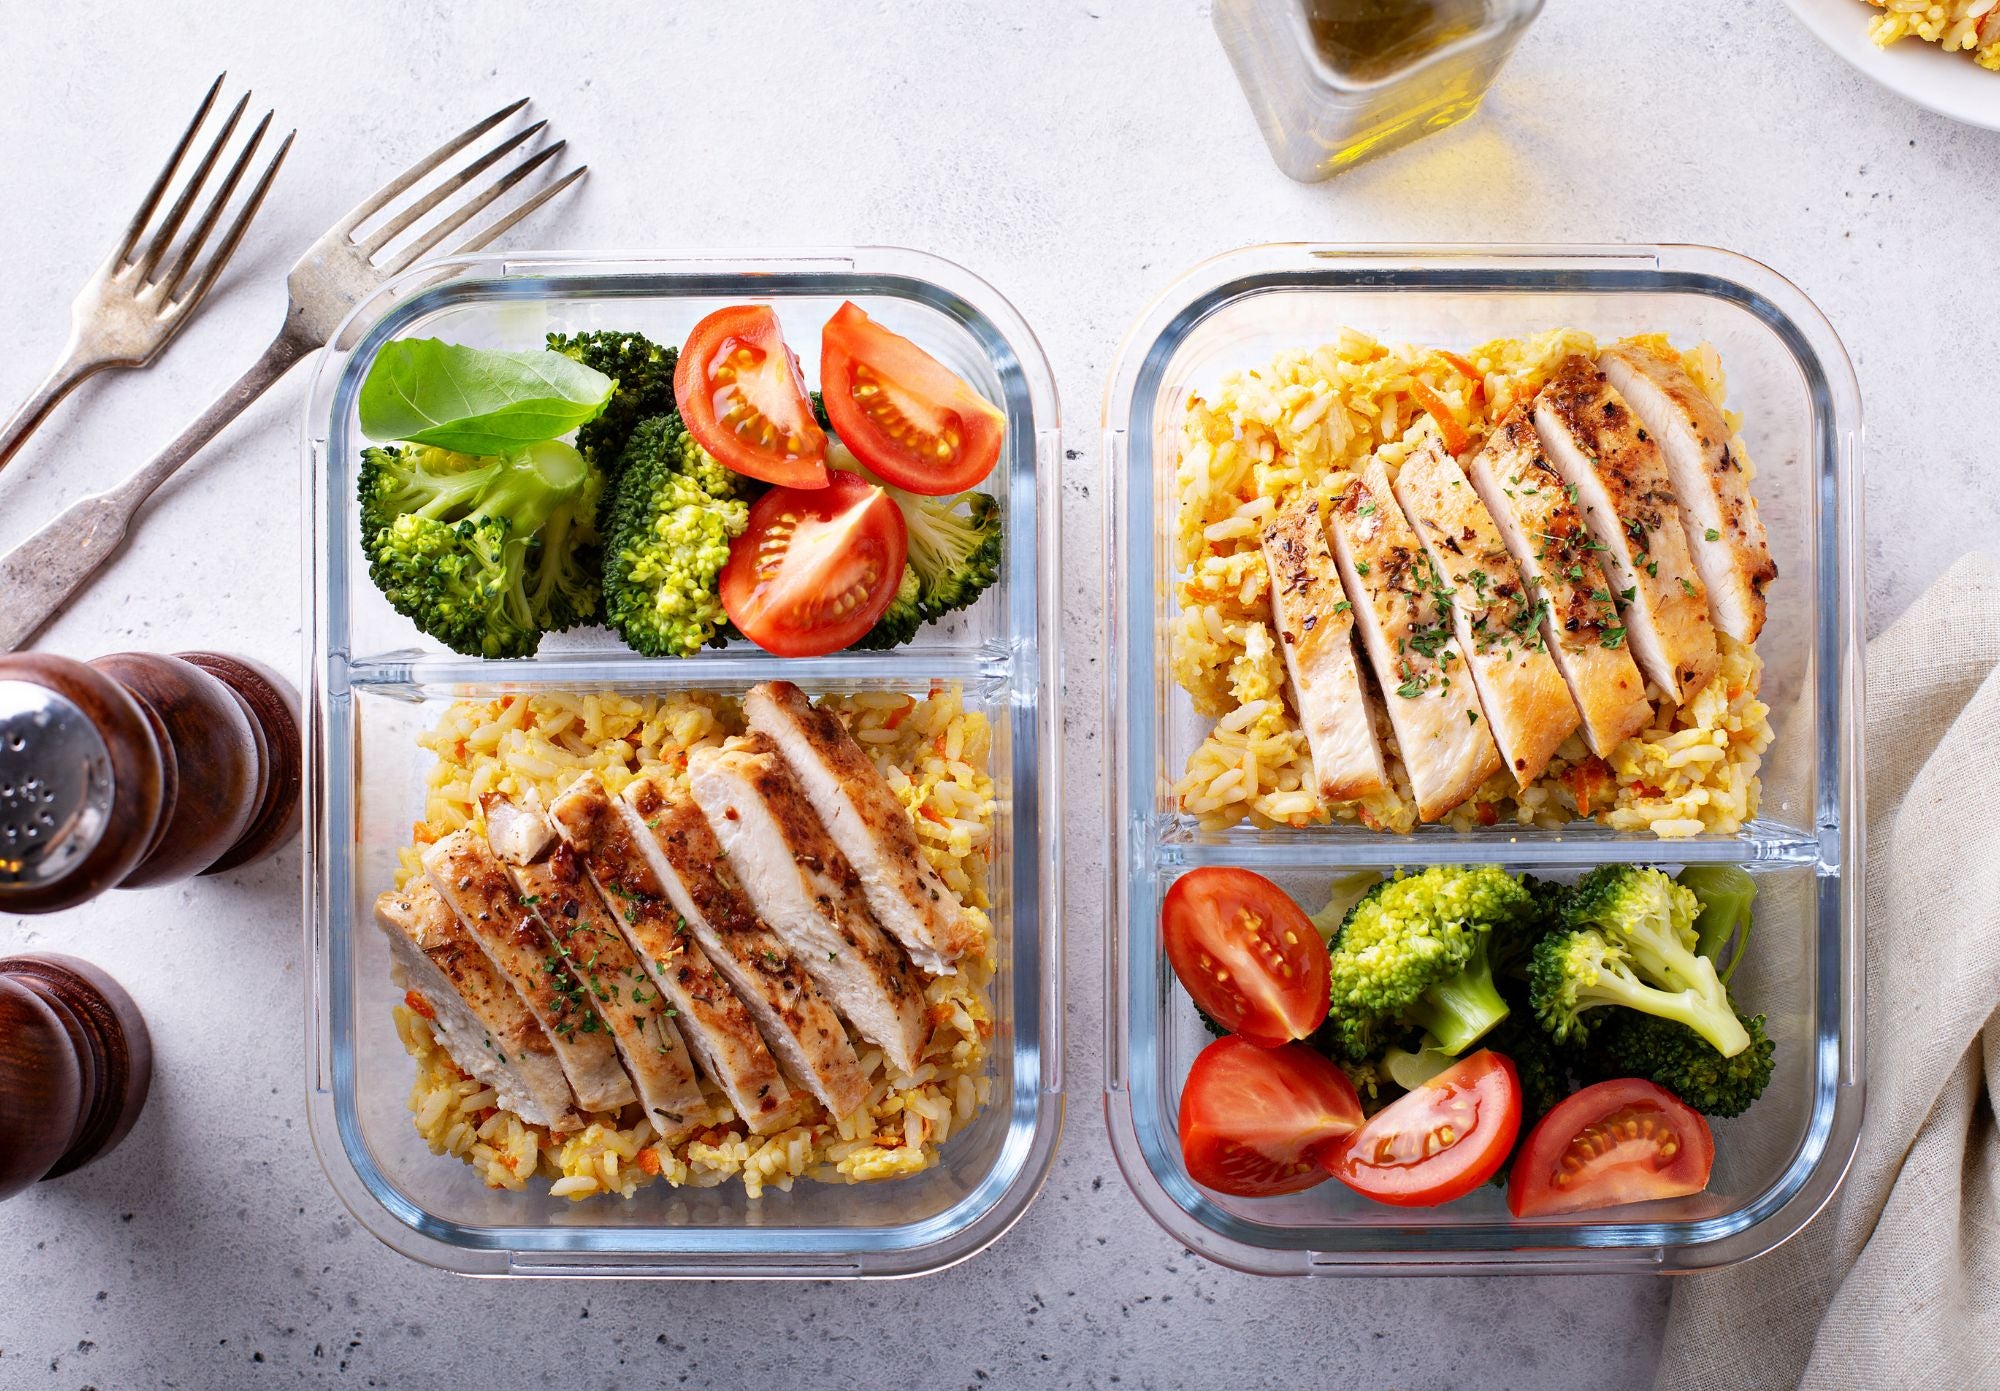 Healthy Eating for Busy Women: Meal Prep Ideas and Time-Saving Tips